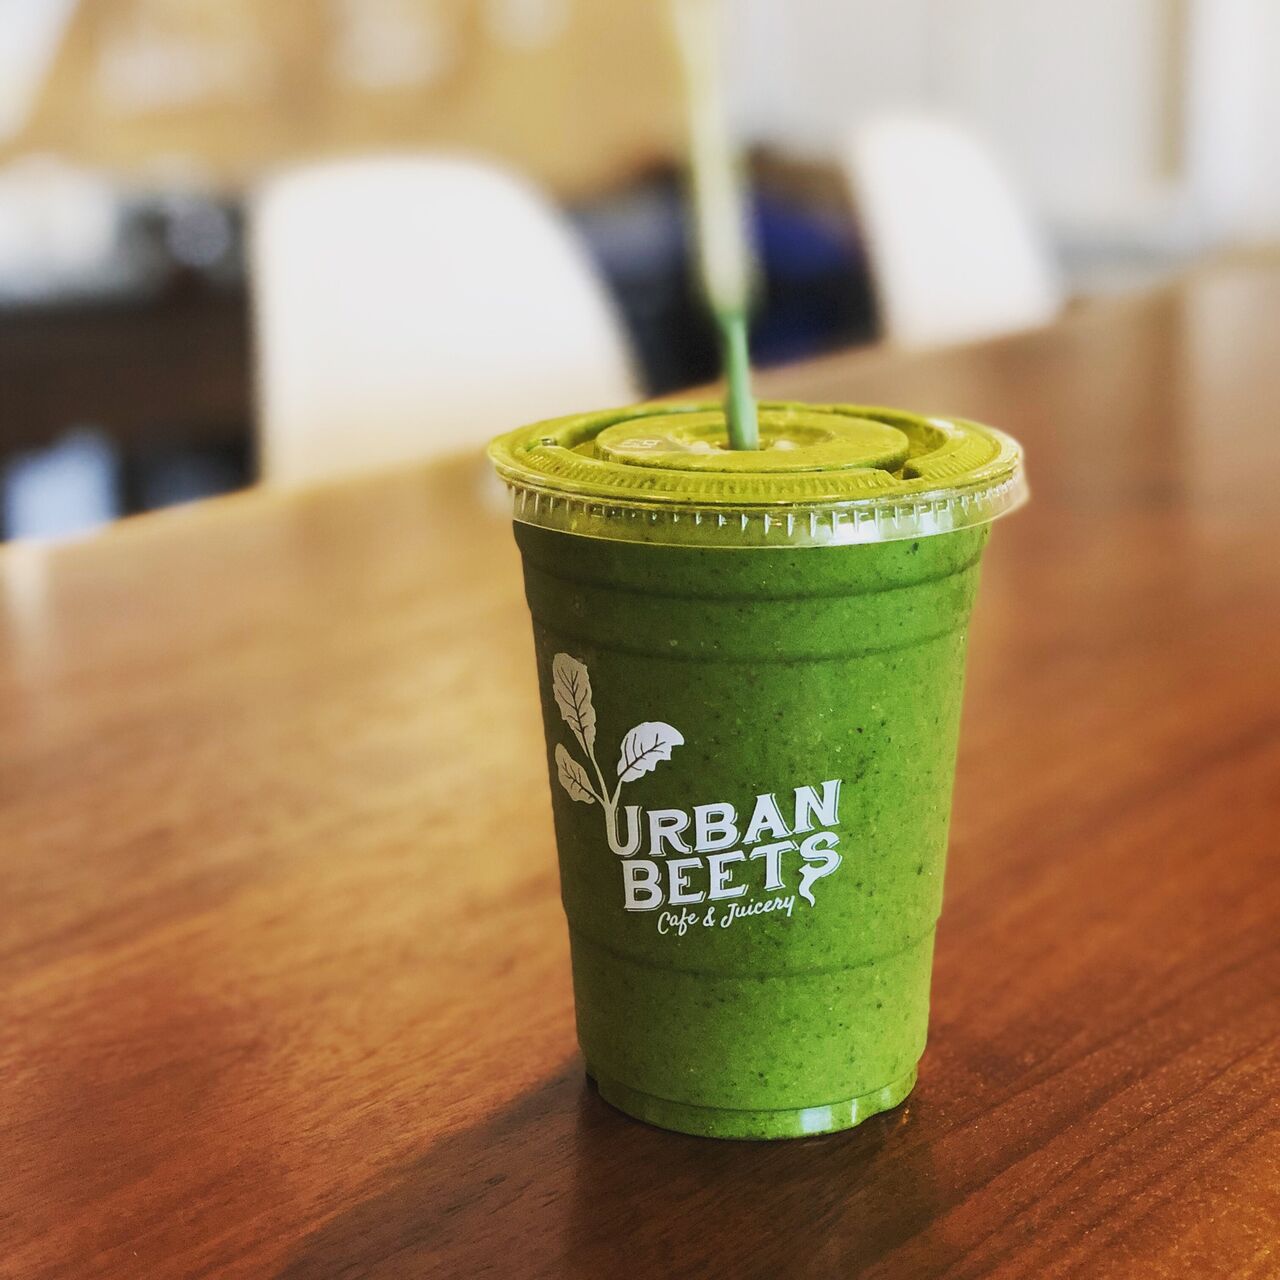 A photo of Urban Beets Cafe & Juicery